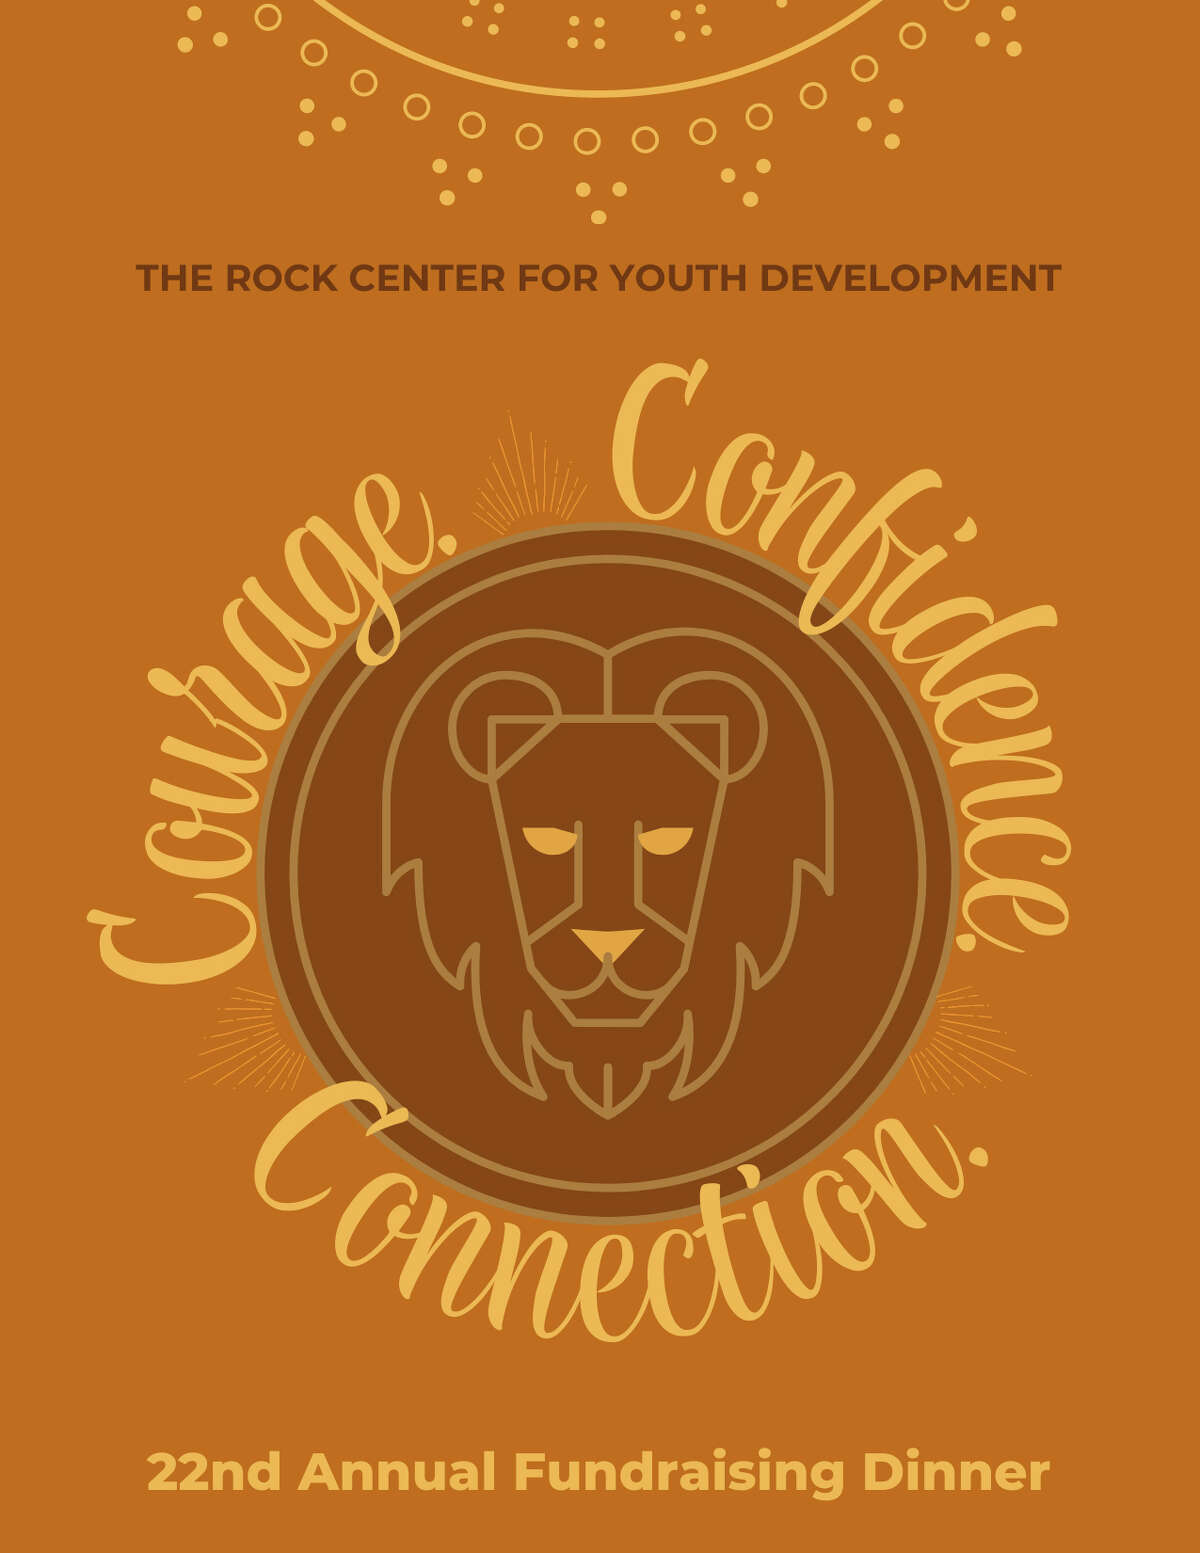 The ROCK Center for Youth Development's 22nd annual fundraising dinner will take place March 10, 2022.